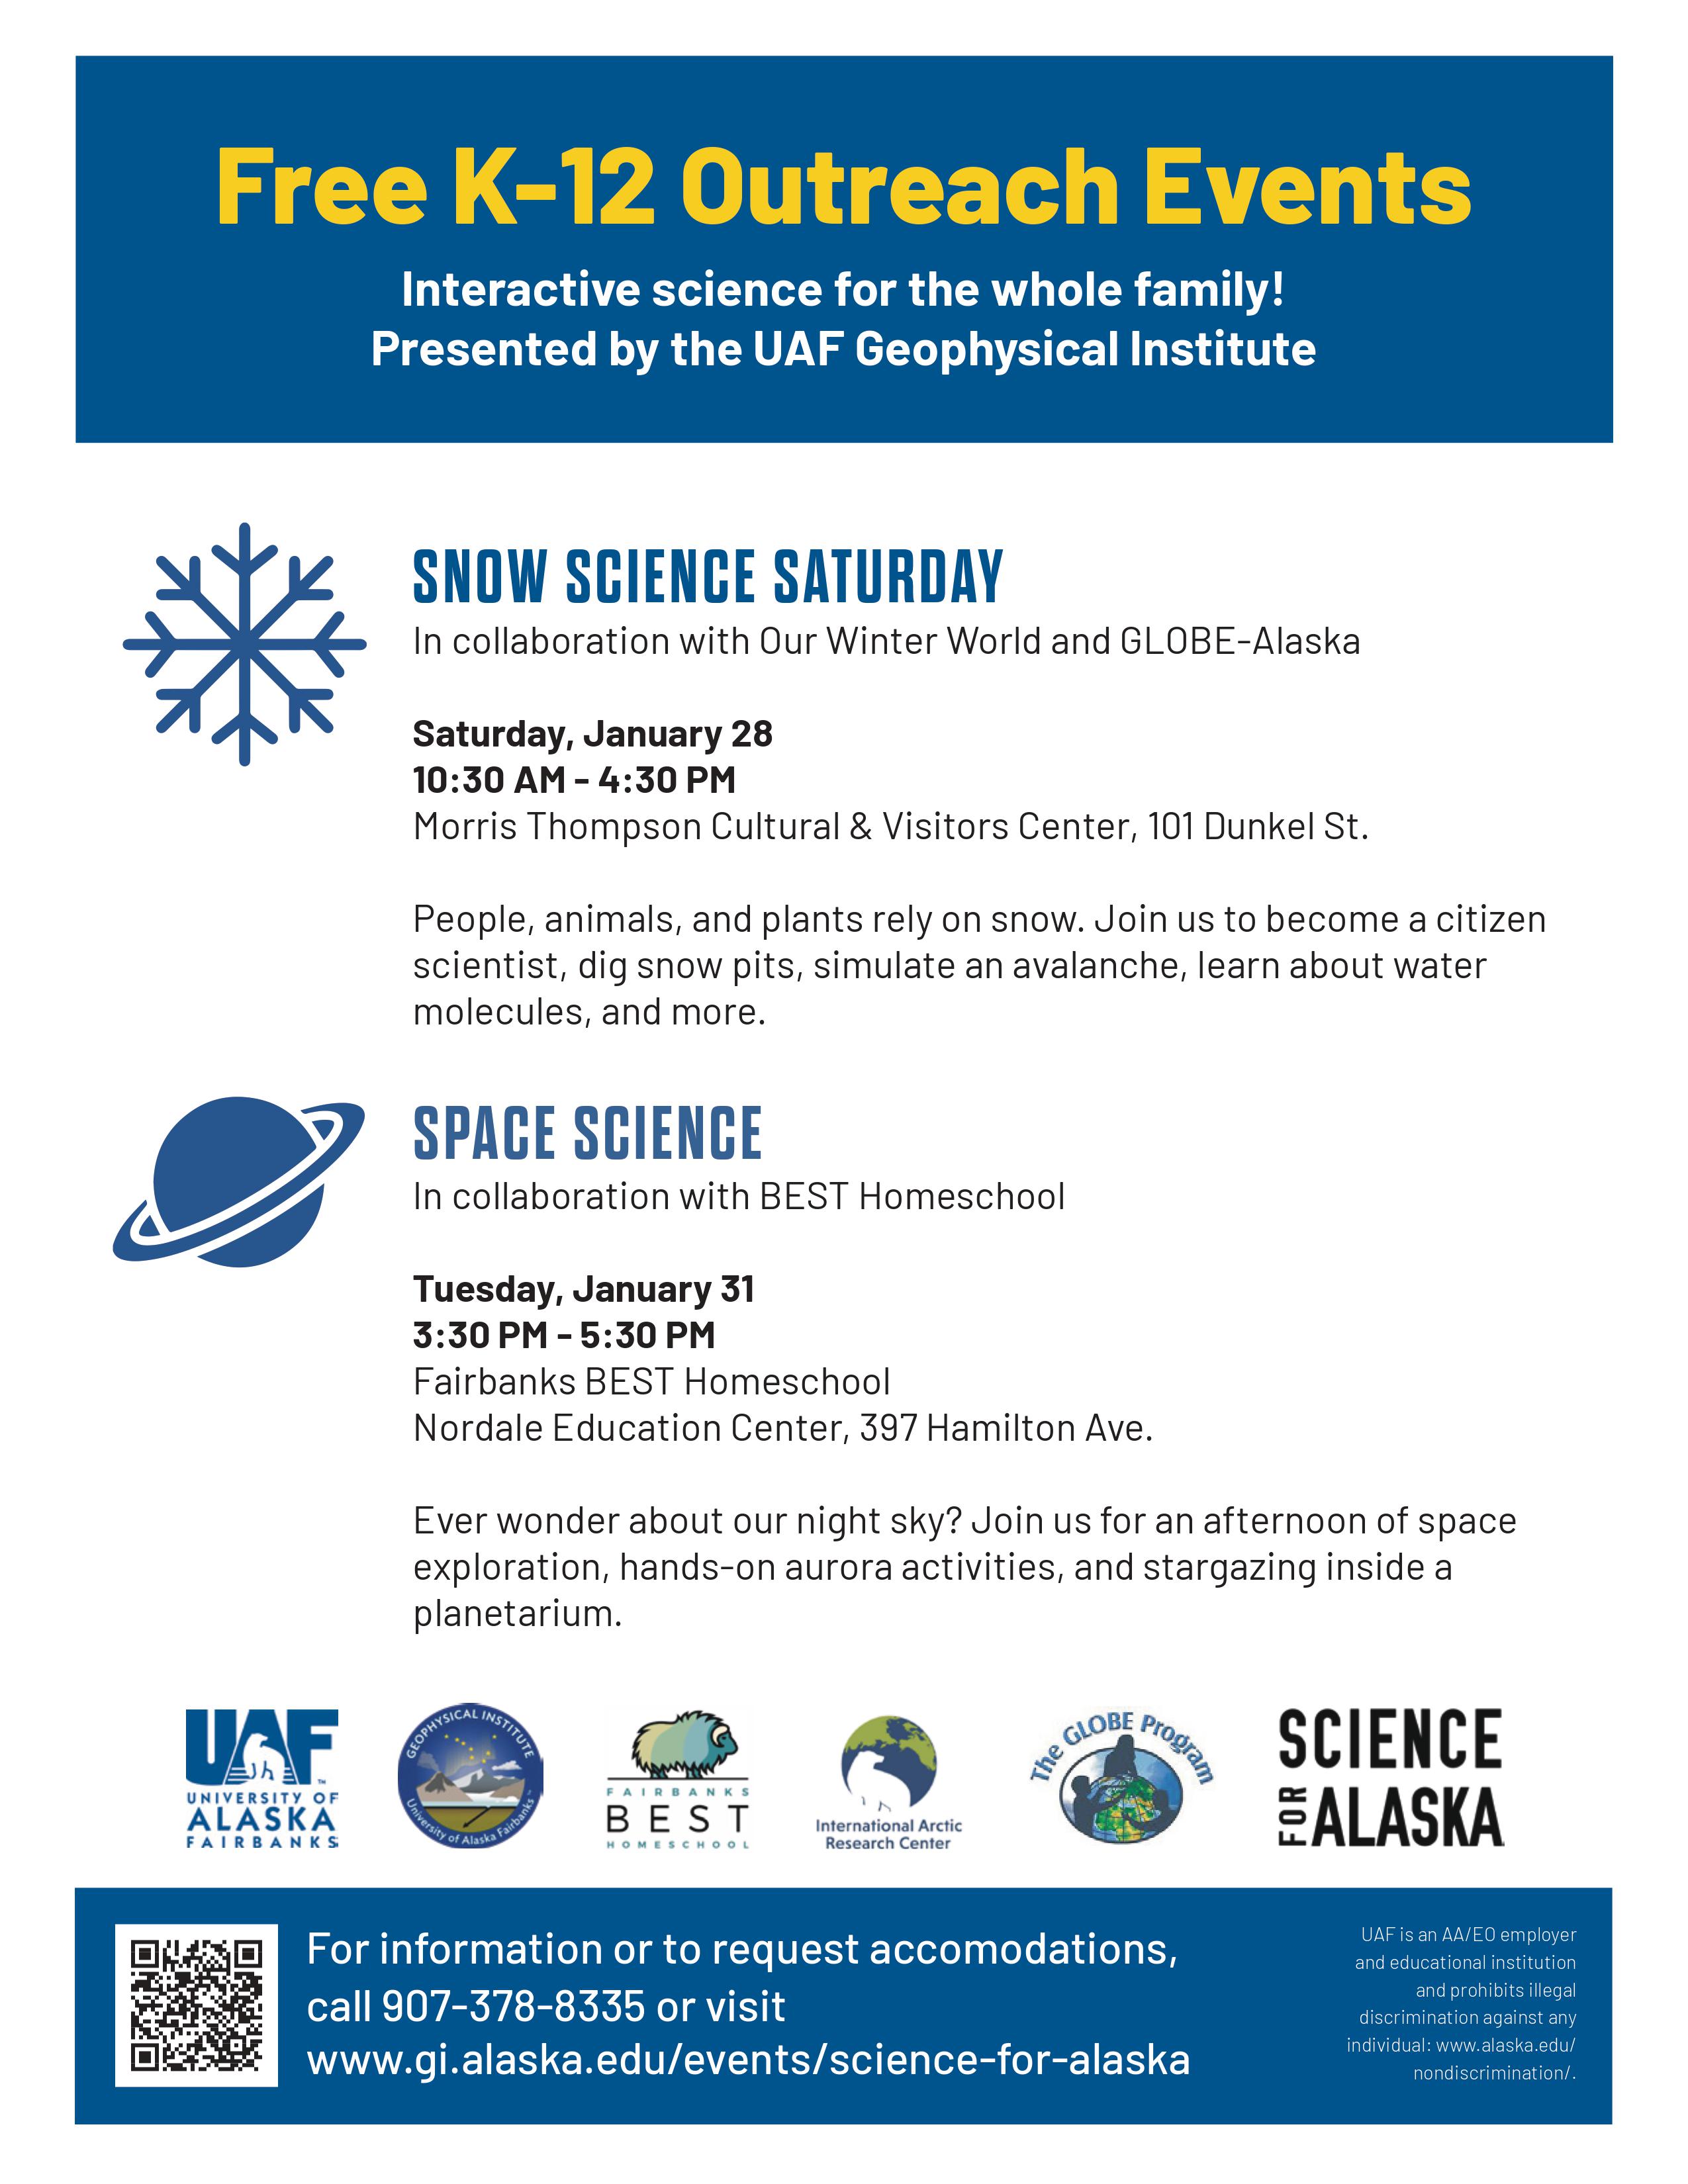 Free k-12 outreach events - interactive science for the whole family! Presented by the UAF Geophysical Institute. Snow Science Saturday in collaboration with our winter world and GLOBE-Alaska. Saturday Jan 28 10:30 AM - 4:30 PM at the Morris Thompson Cultural and Visitors Center 101 Dunkle St. People, animals, and plants rely on snow. Join us to become a citizen scientist, dog snow pits, simulate an avalanche, learn about water molecules and more. Space Science in collaboration with BEST Homeschool on Tues Jan 31 from 3:30 PM - 5:30 PM at Fairbanks BEST Homeschool Nordale Education Center 397 Hamilton Ave. Ever wonder about our night sky? Join us for an afternoon of space exploration, hands-on aurora activities, and stargazing inside a planetarium. For information or to request accommodations, call 907-378-8335 or visit the UAF GI webpage under events (science for alaska). 